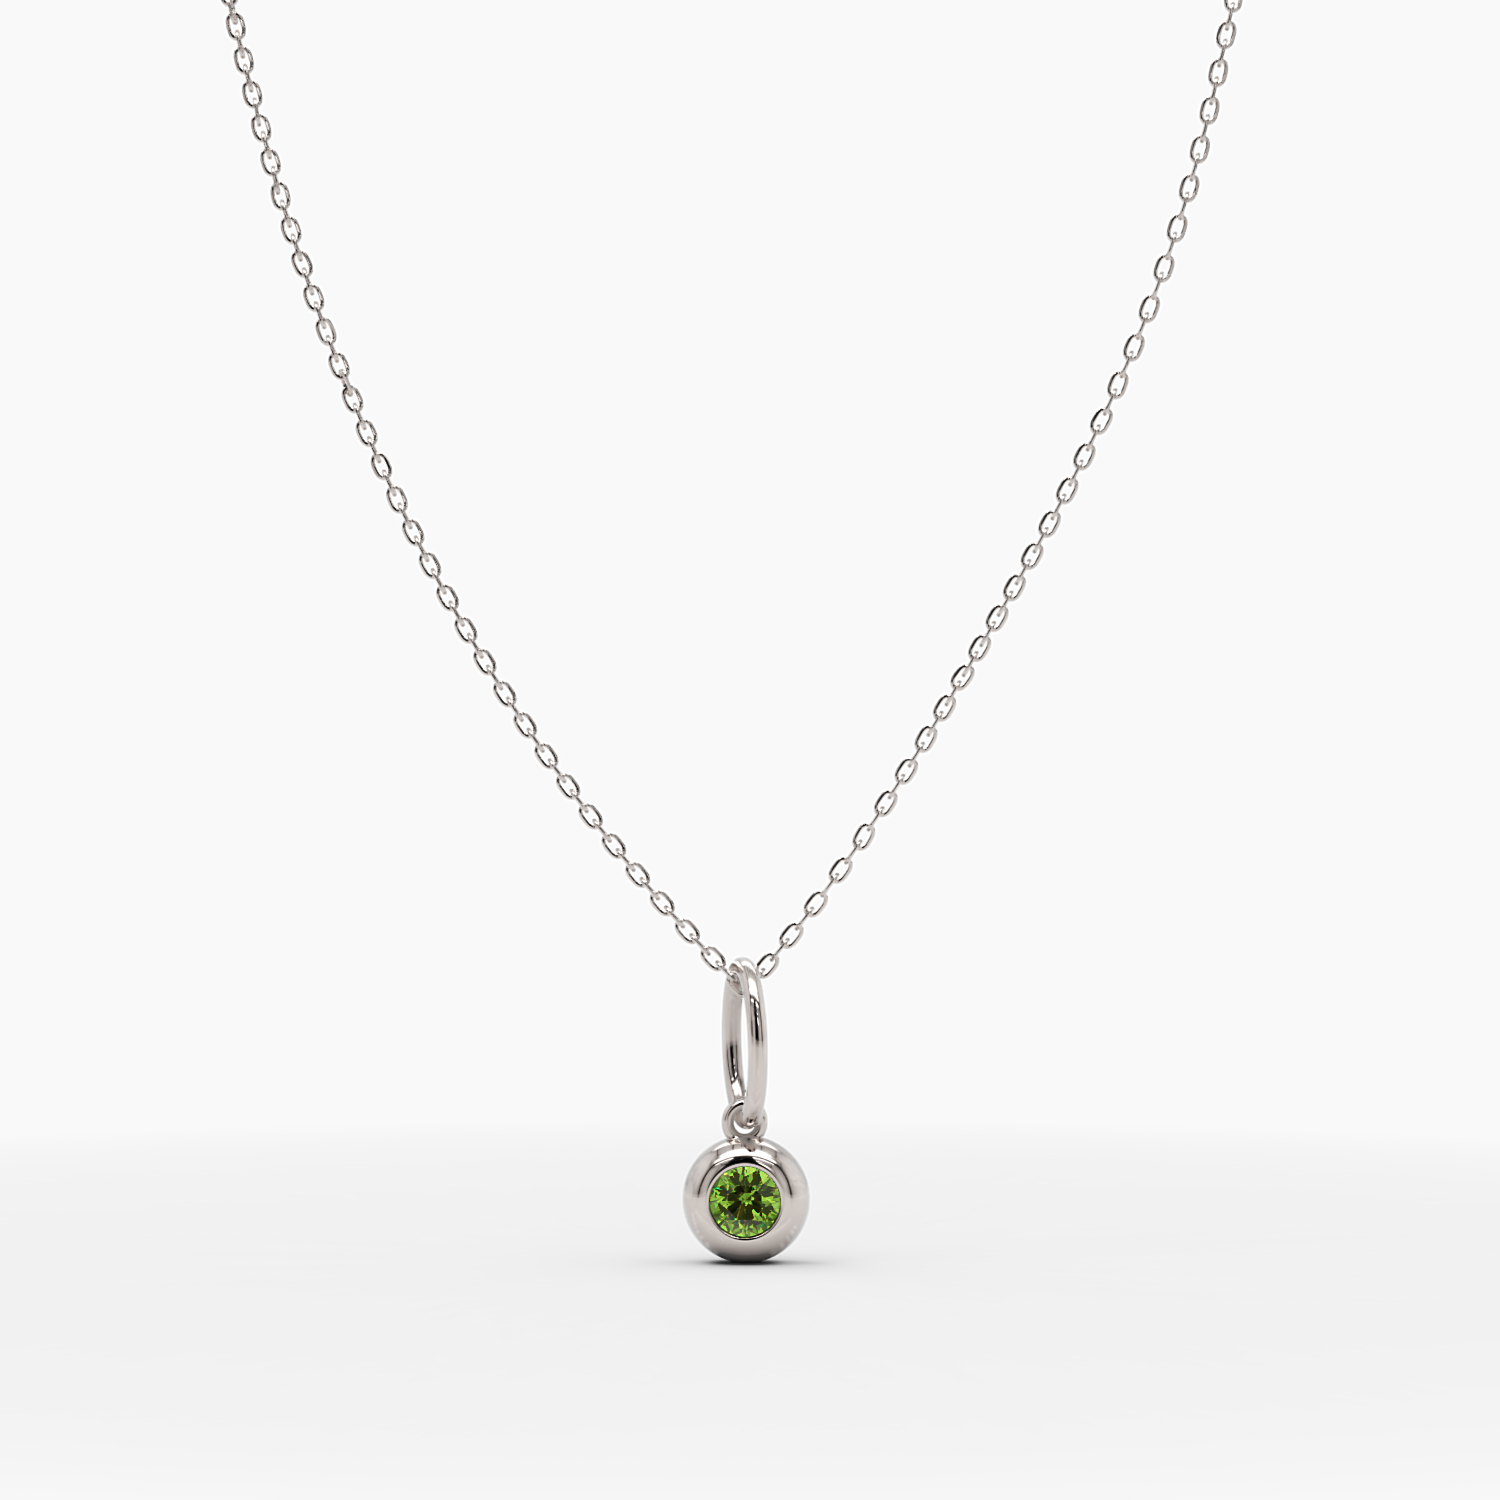 August Birthstone Peridot Necklace